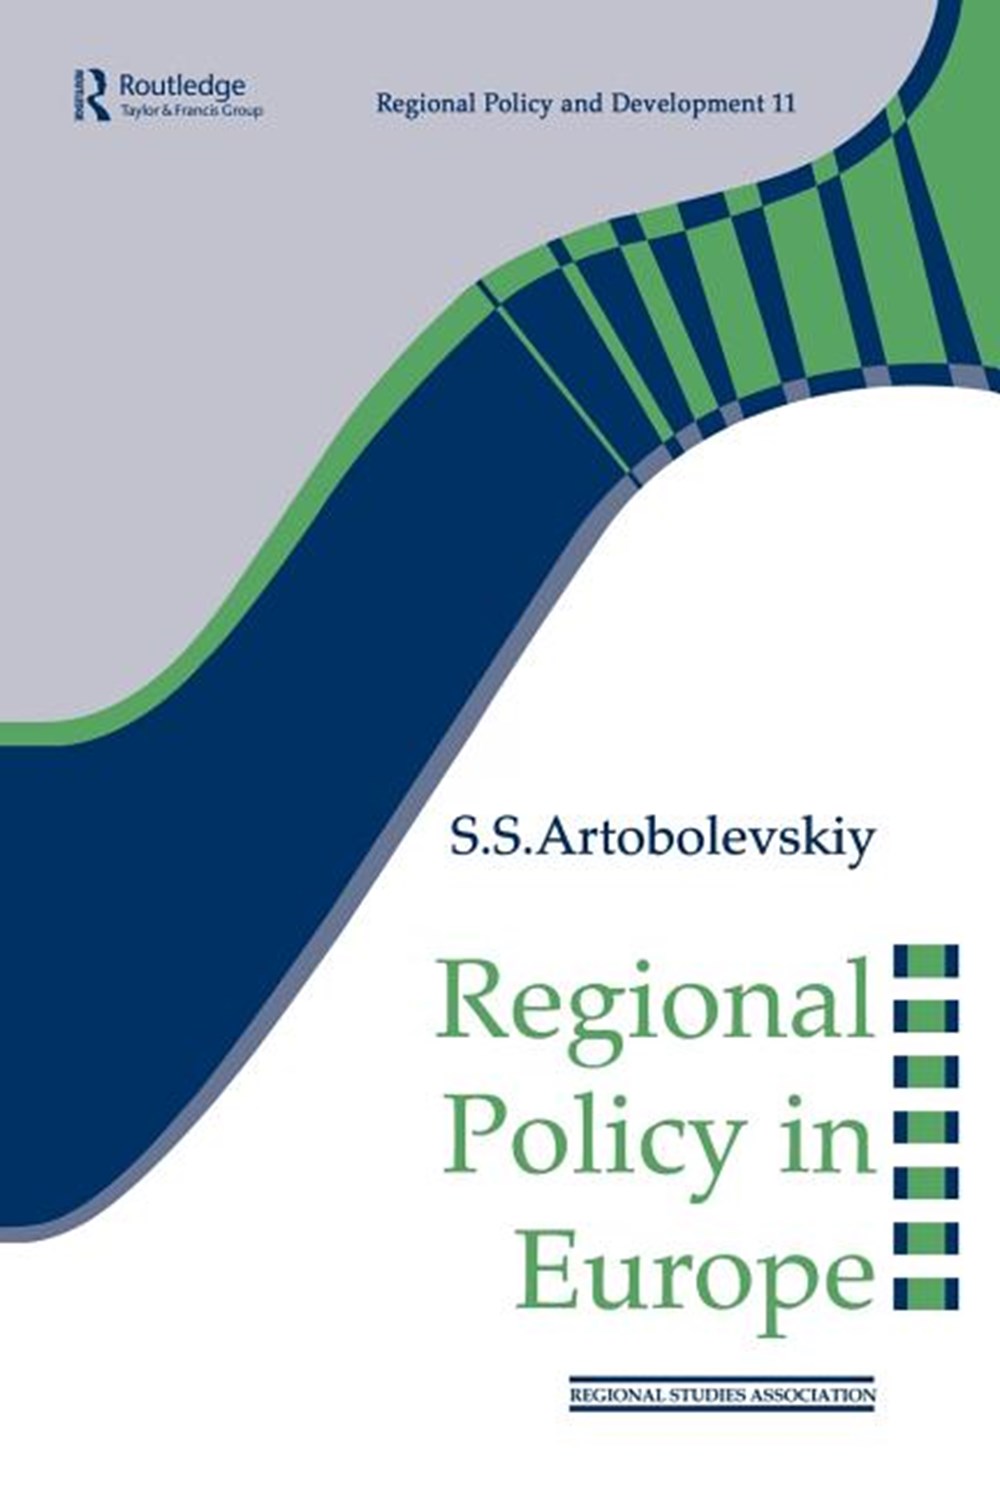 Regional Policy in Europe (Revised)